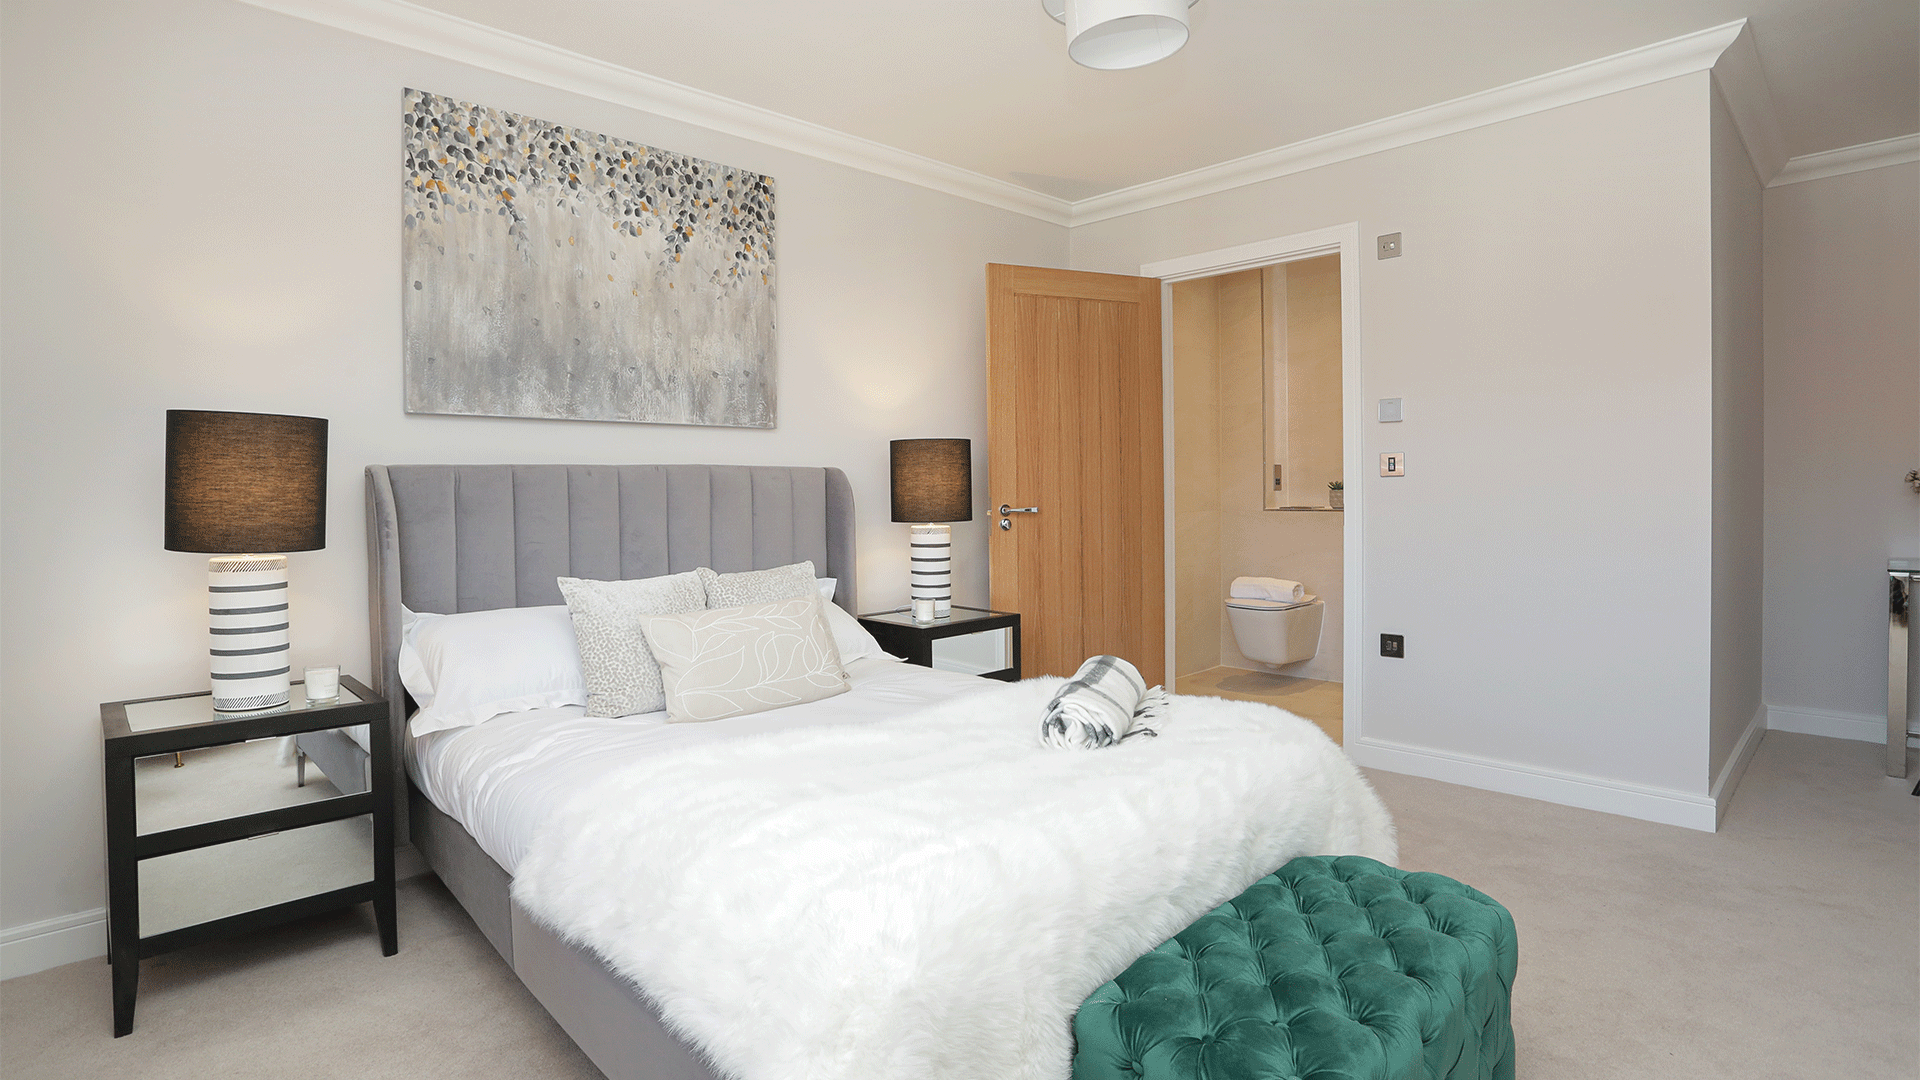 Miller's Meadow plot 8 Bedroom 2 with the en suite, bed, artwork and bedside tables and lamps